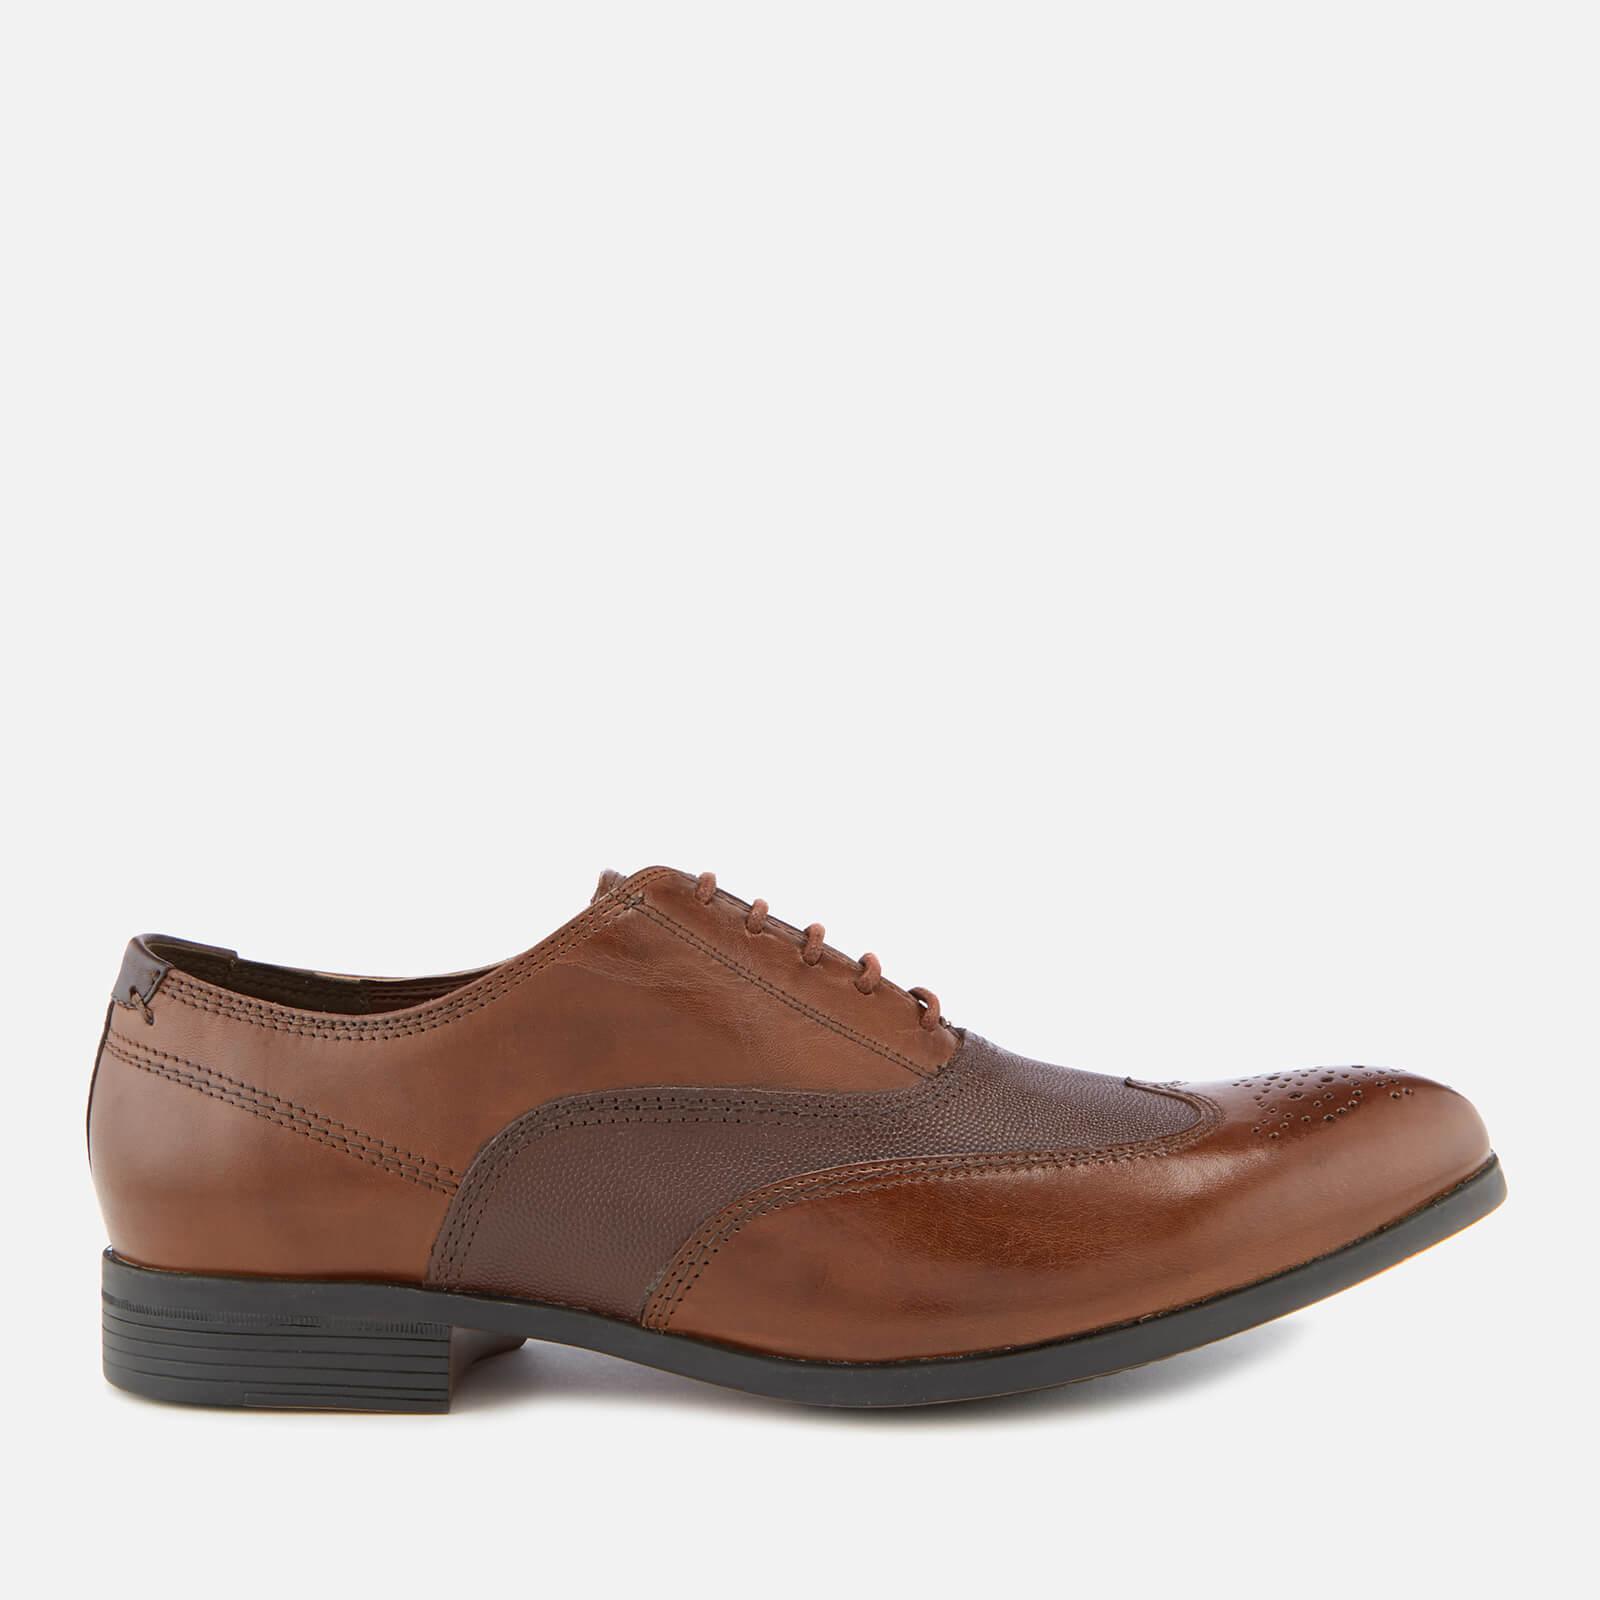 gilmore wing clarks